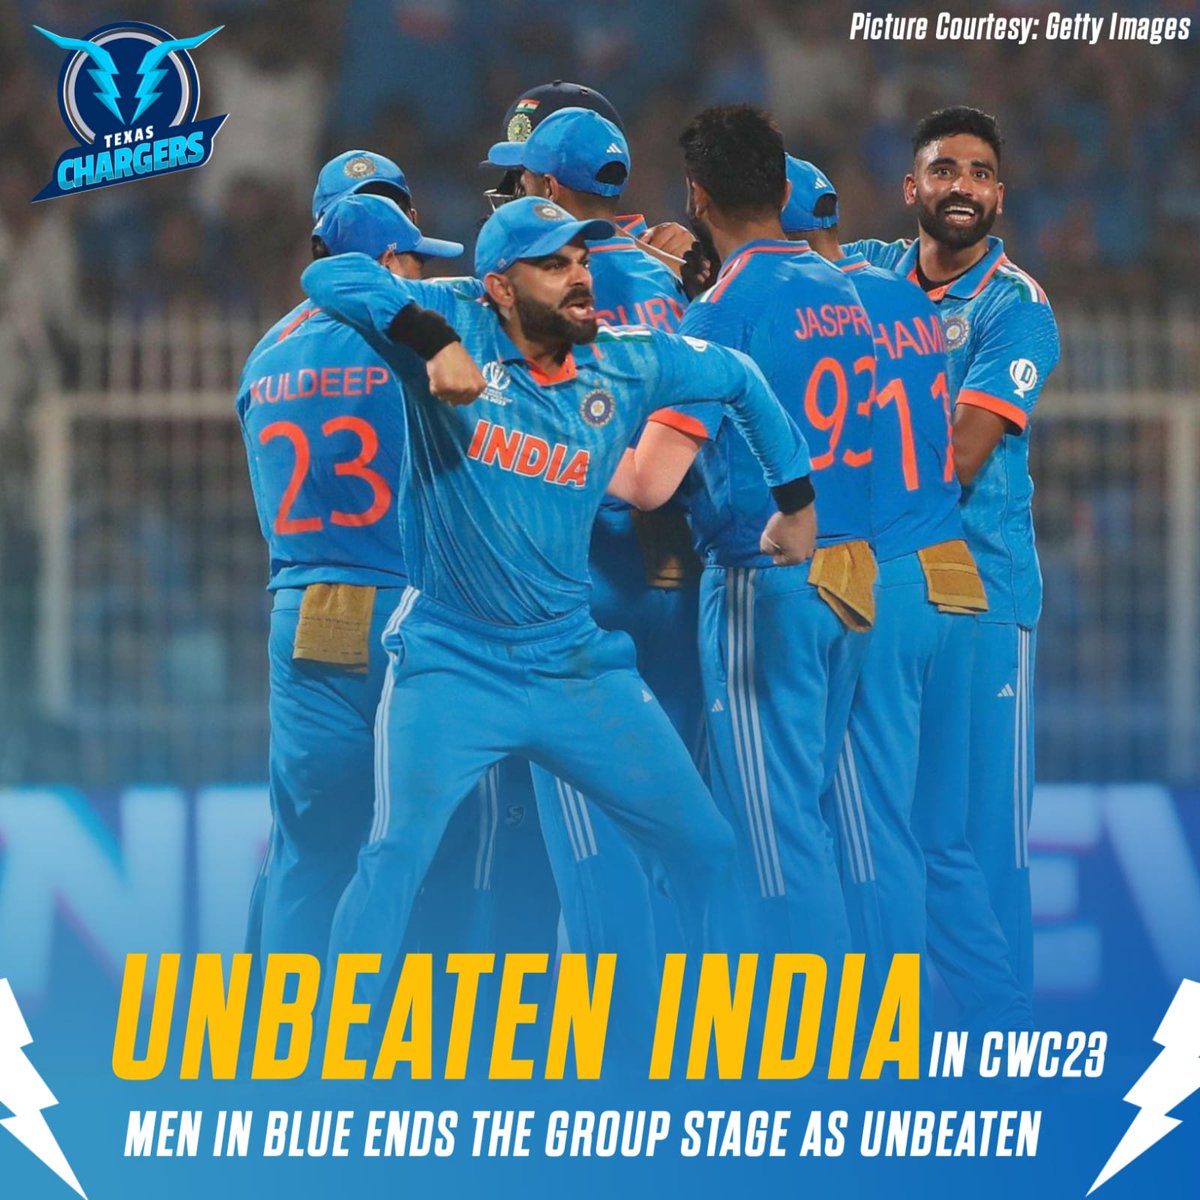 Team India 🇮🇳 has been absolutely dominant in their World Cup campaign 🔥 Won every single group game they have played in #CWC23, showcasing their sheer brilliance & determination 👌 Semis bound now 🏆 #TexasChargers #CricketWorldCup #IndianCricket #Cricket #ChargingToVictor